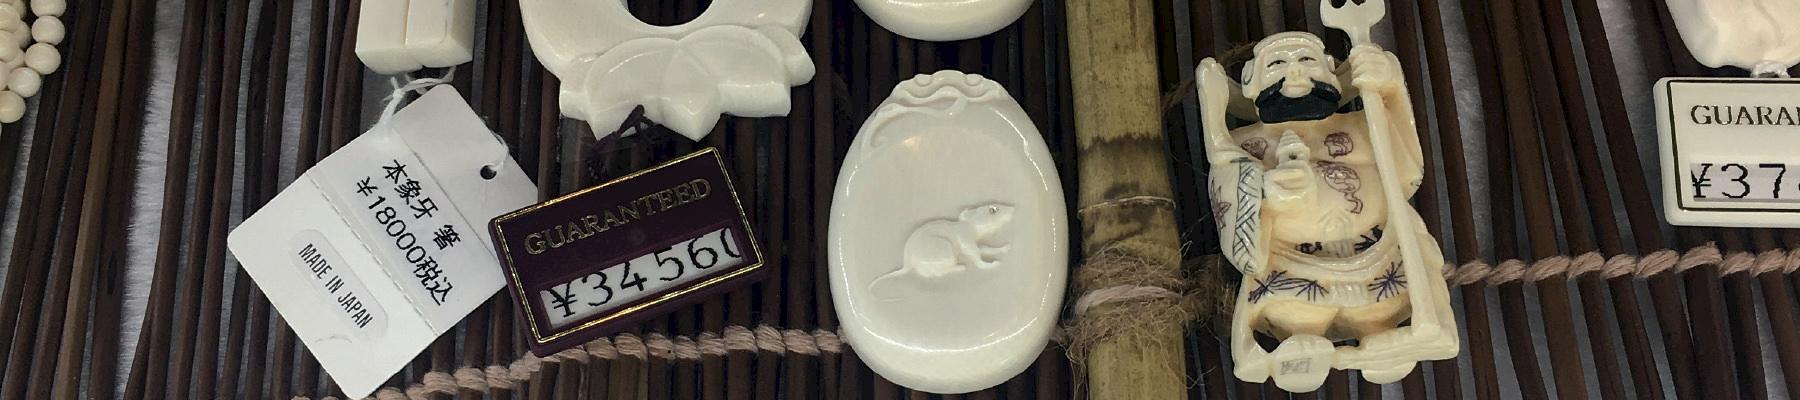 Display of ivory items at a shop in Tokyo’s tourist areas. A sticker promotes “made in Japan” shown also in Chinese and Korean © TRAFFIC